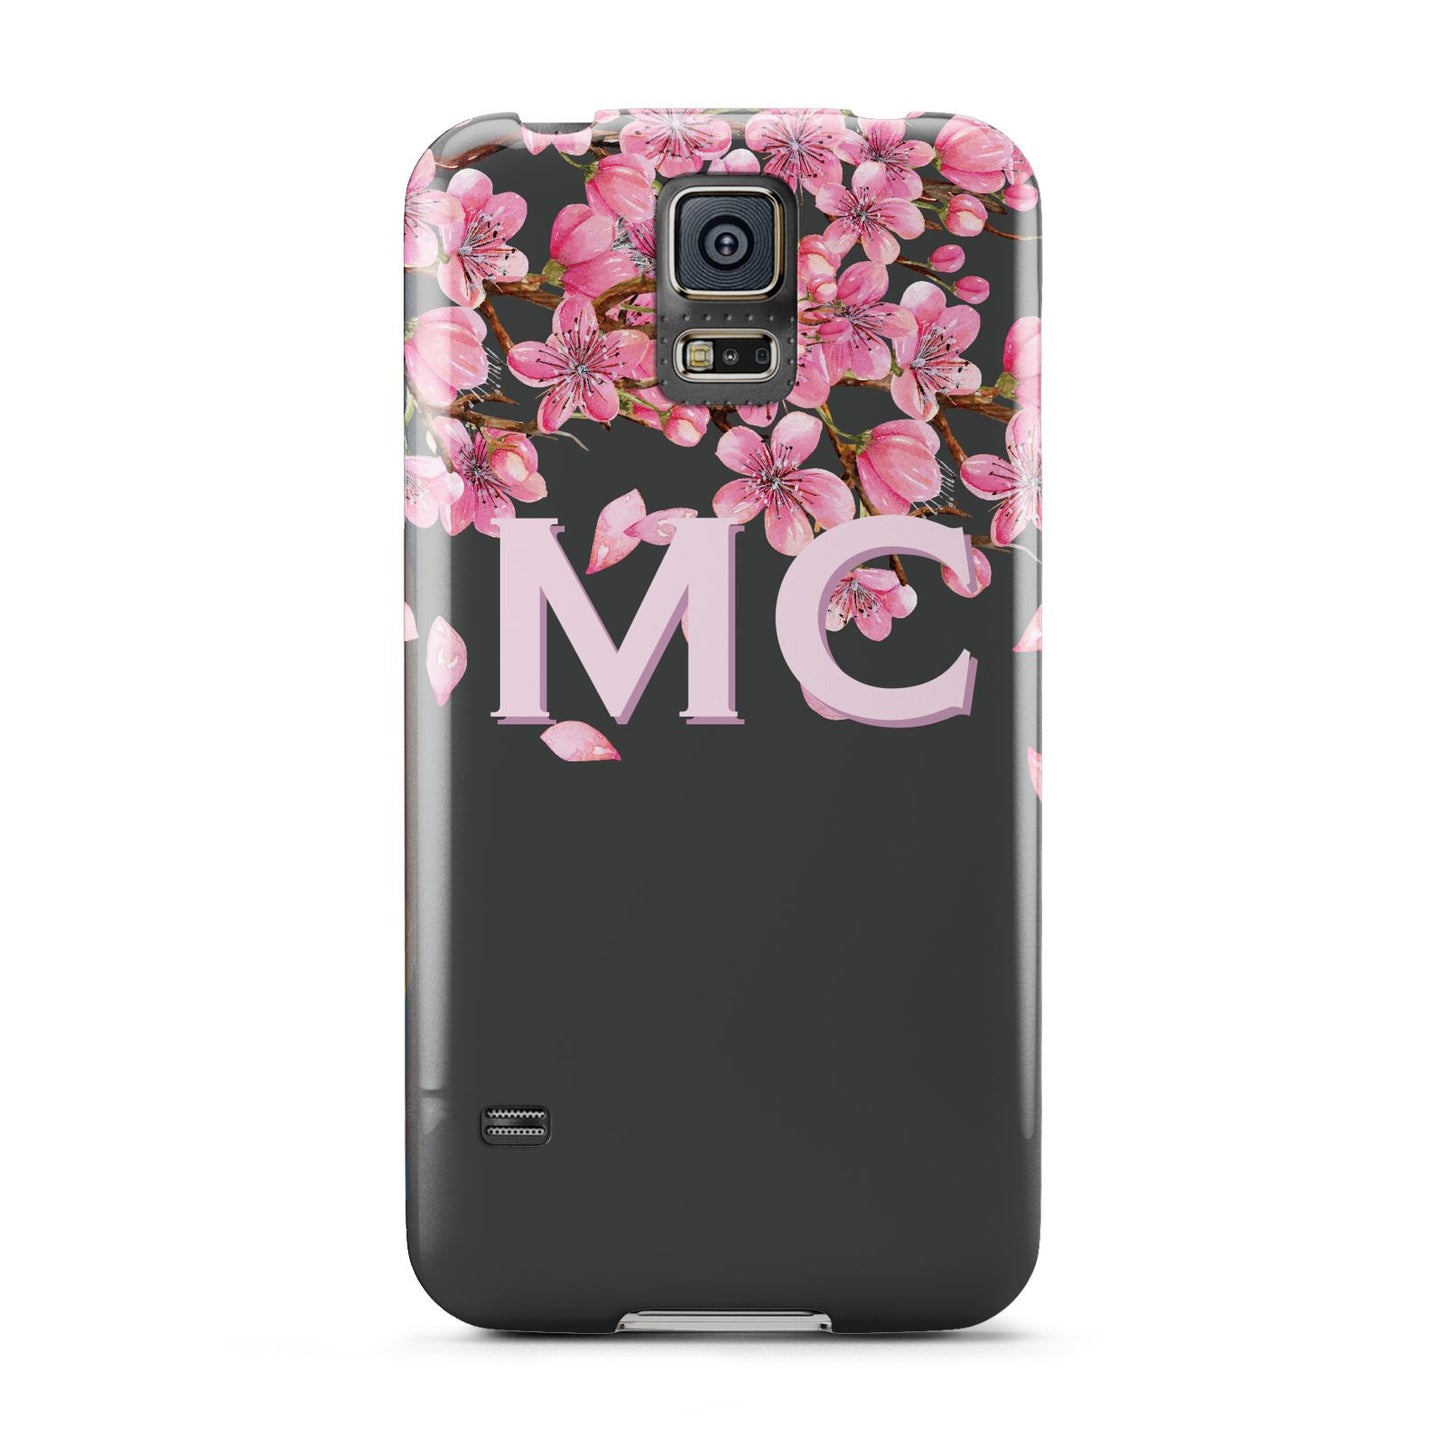 Personalised Floral Blossom Black Pink Samsung Galaxy S5 Case